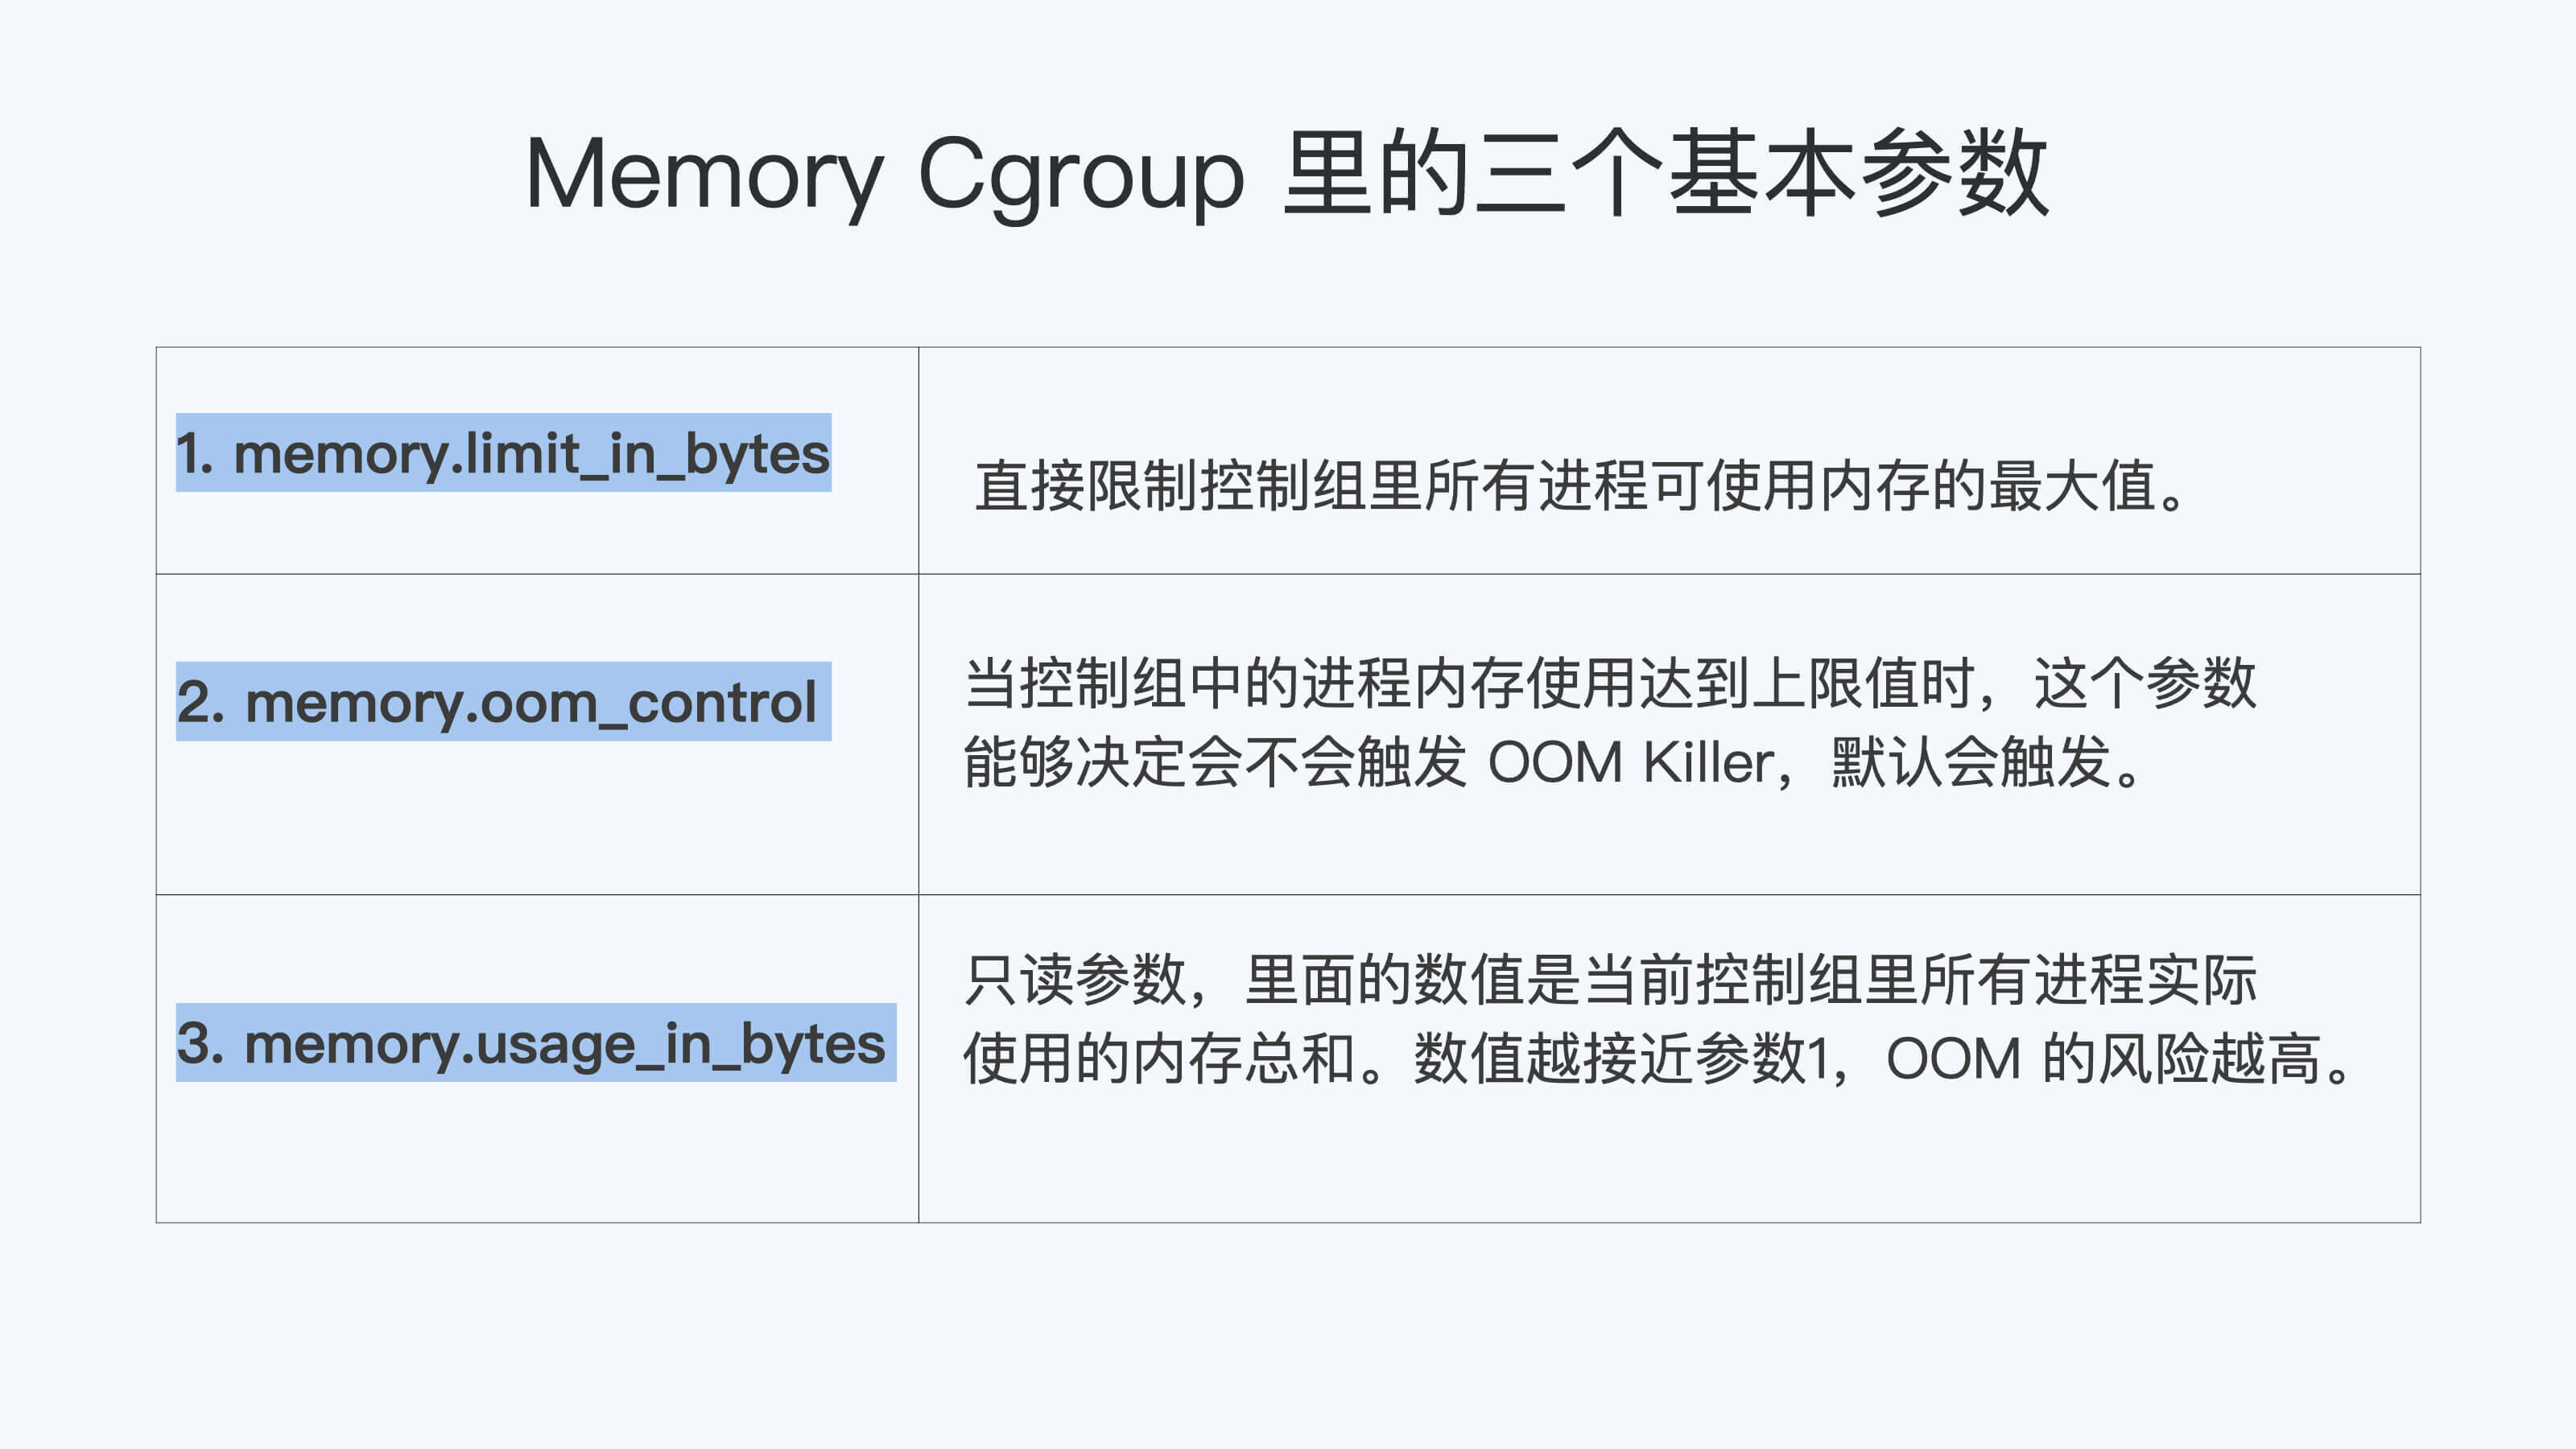 https://img.zhaoweiguo.com/knowledge/images/linuxs/kernels/memory1.jpeg